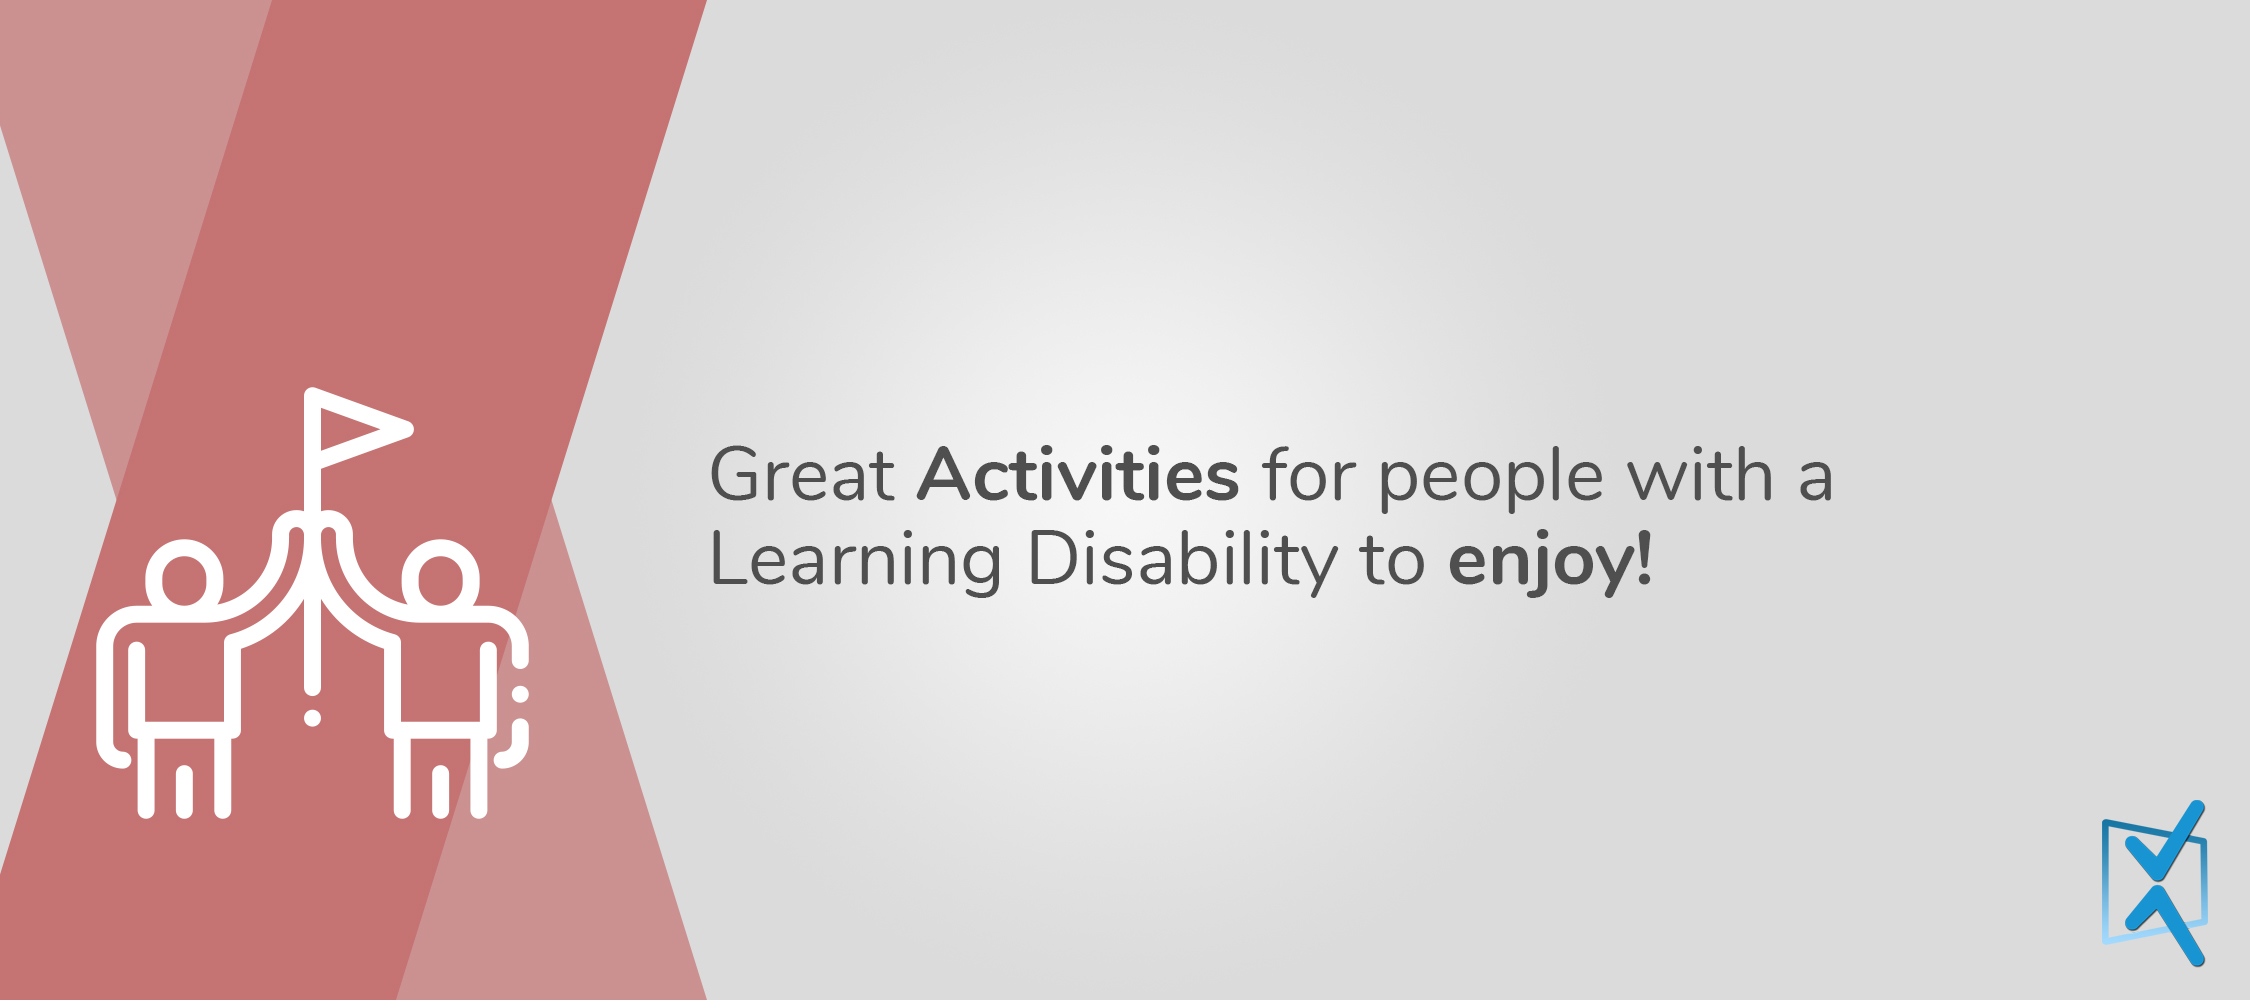 Great Activities for people with a Learning Disability to enjoy!